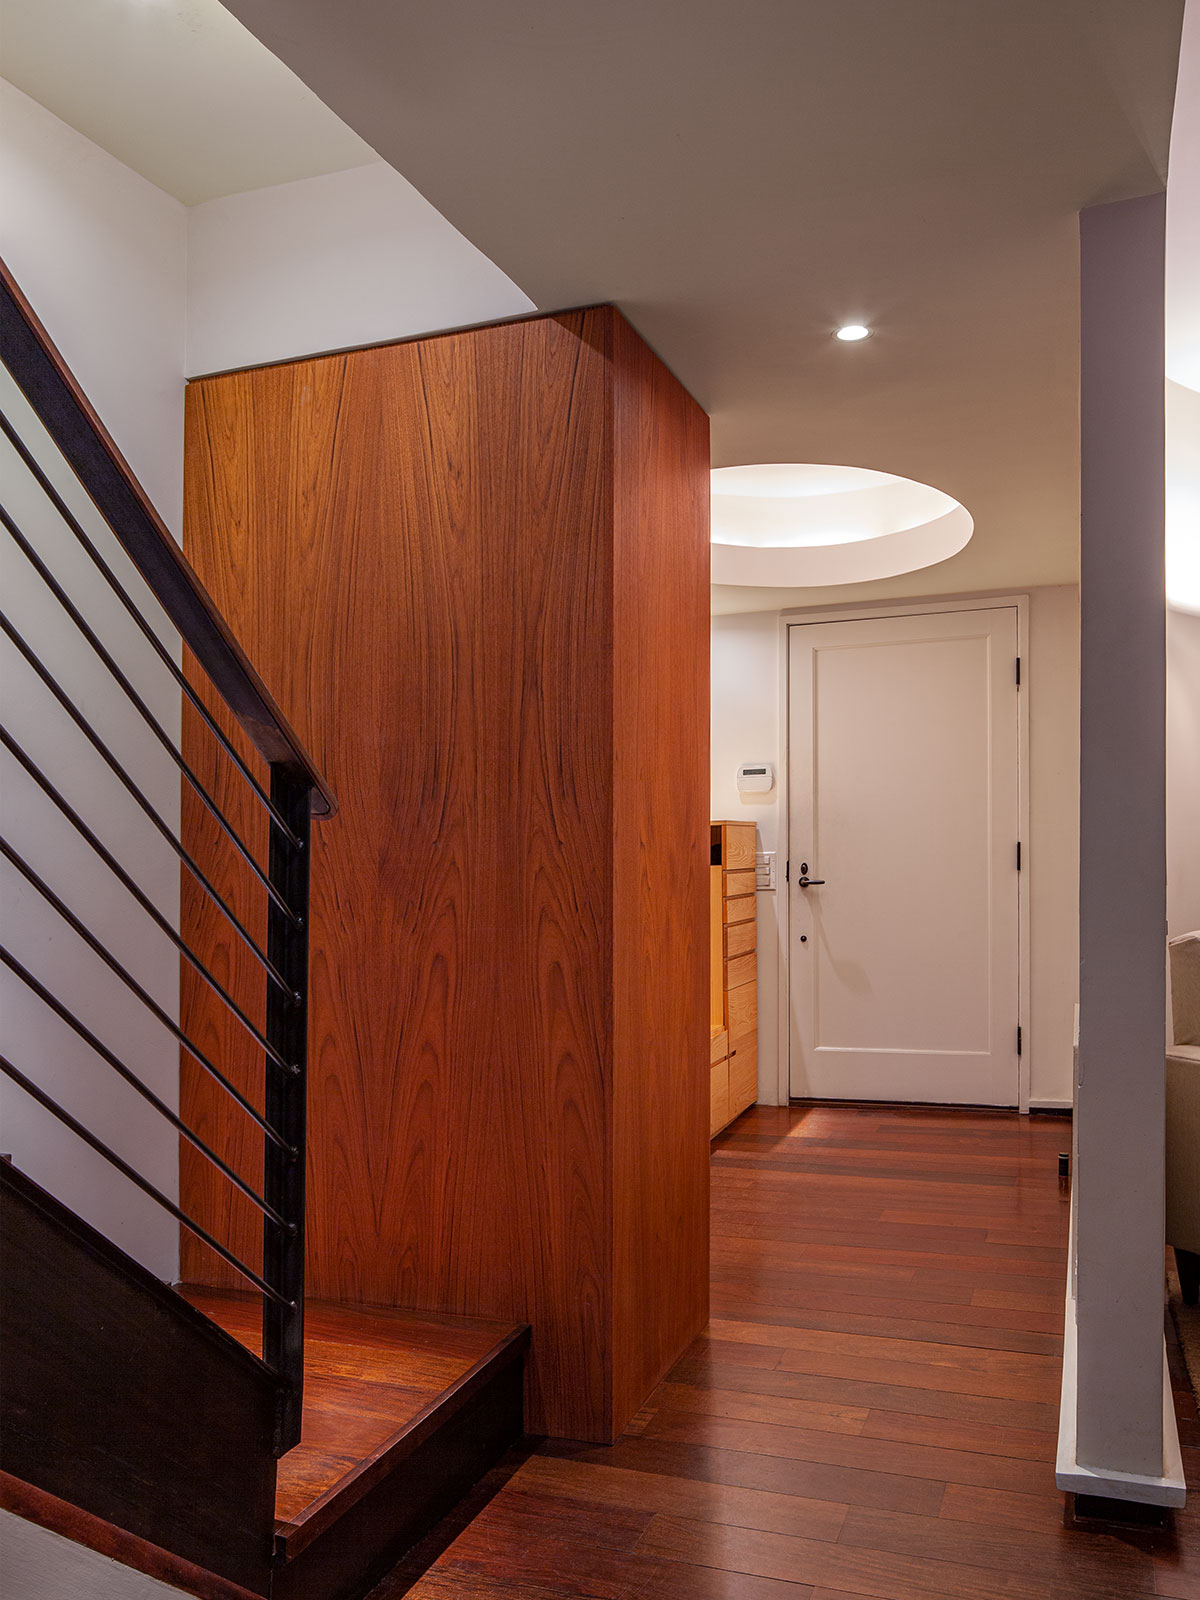 A teak paneled wall A divides the minimalist stair from the Entry. The low ceiling at the Entry is made higher with a recessed oval architectural light; wide wood floorboards connect the spaces.